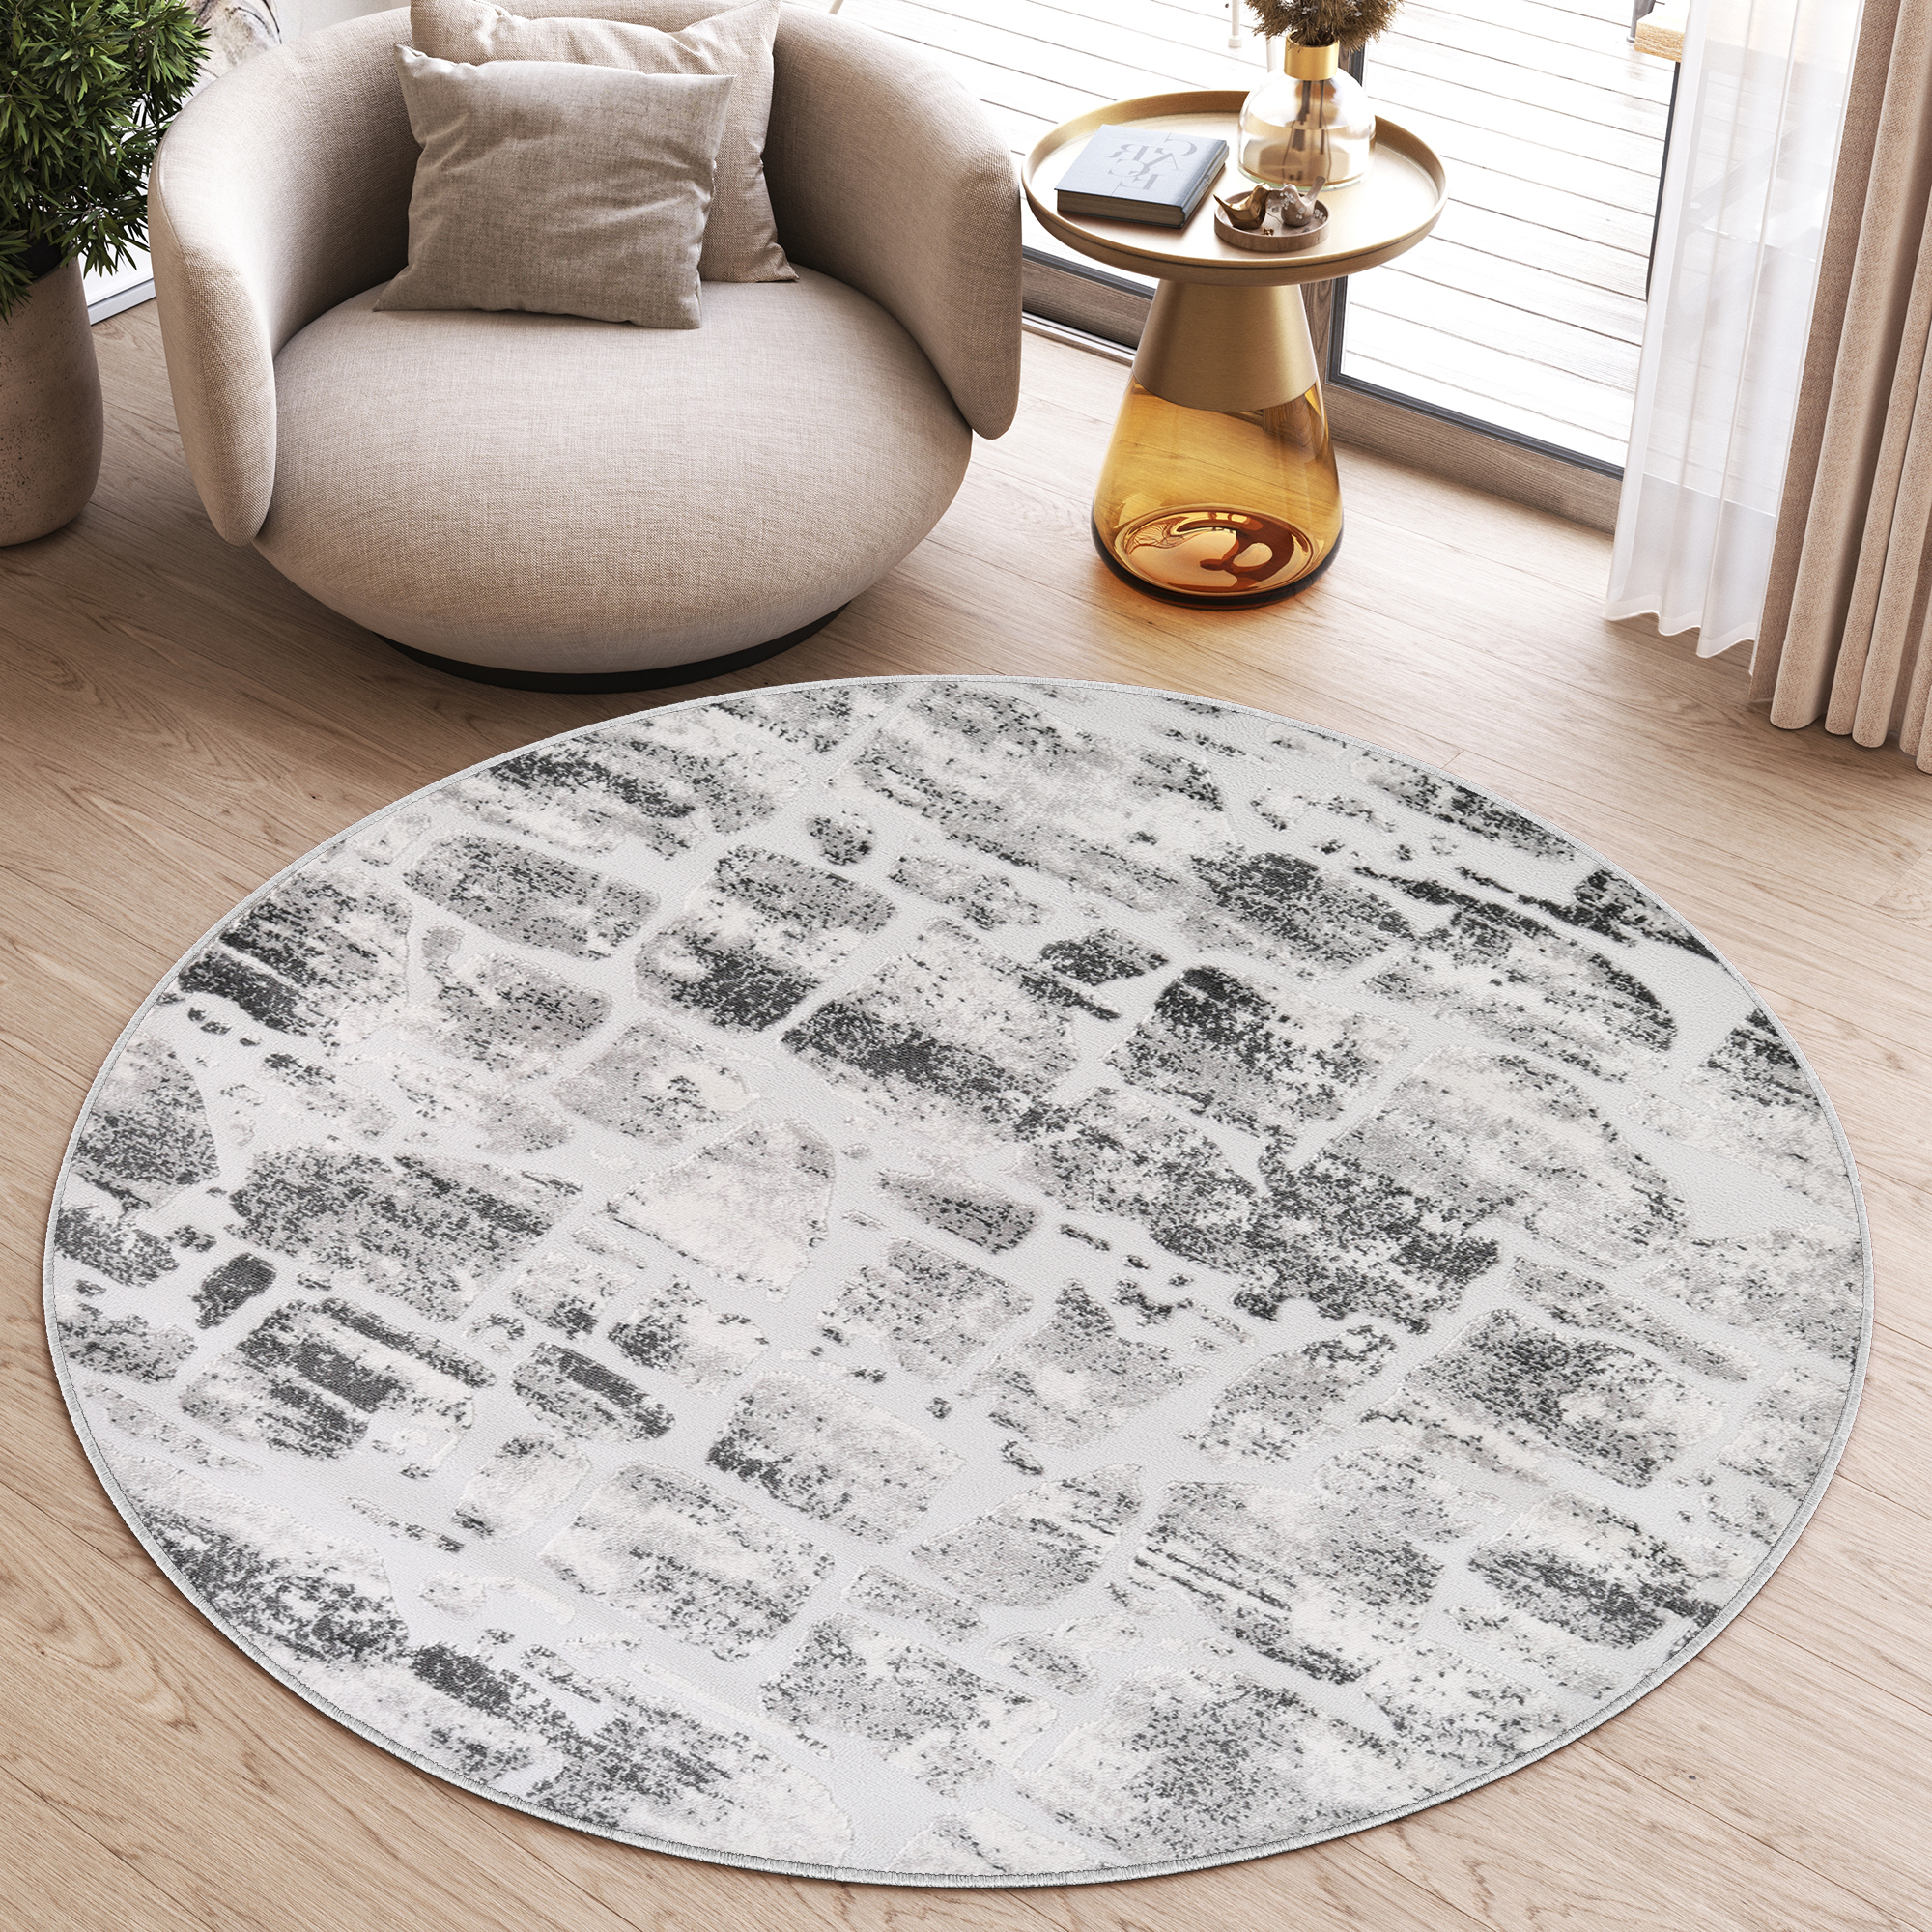 Tapis Sky Rond Gris Beige Abstrait Rayures